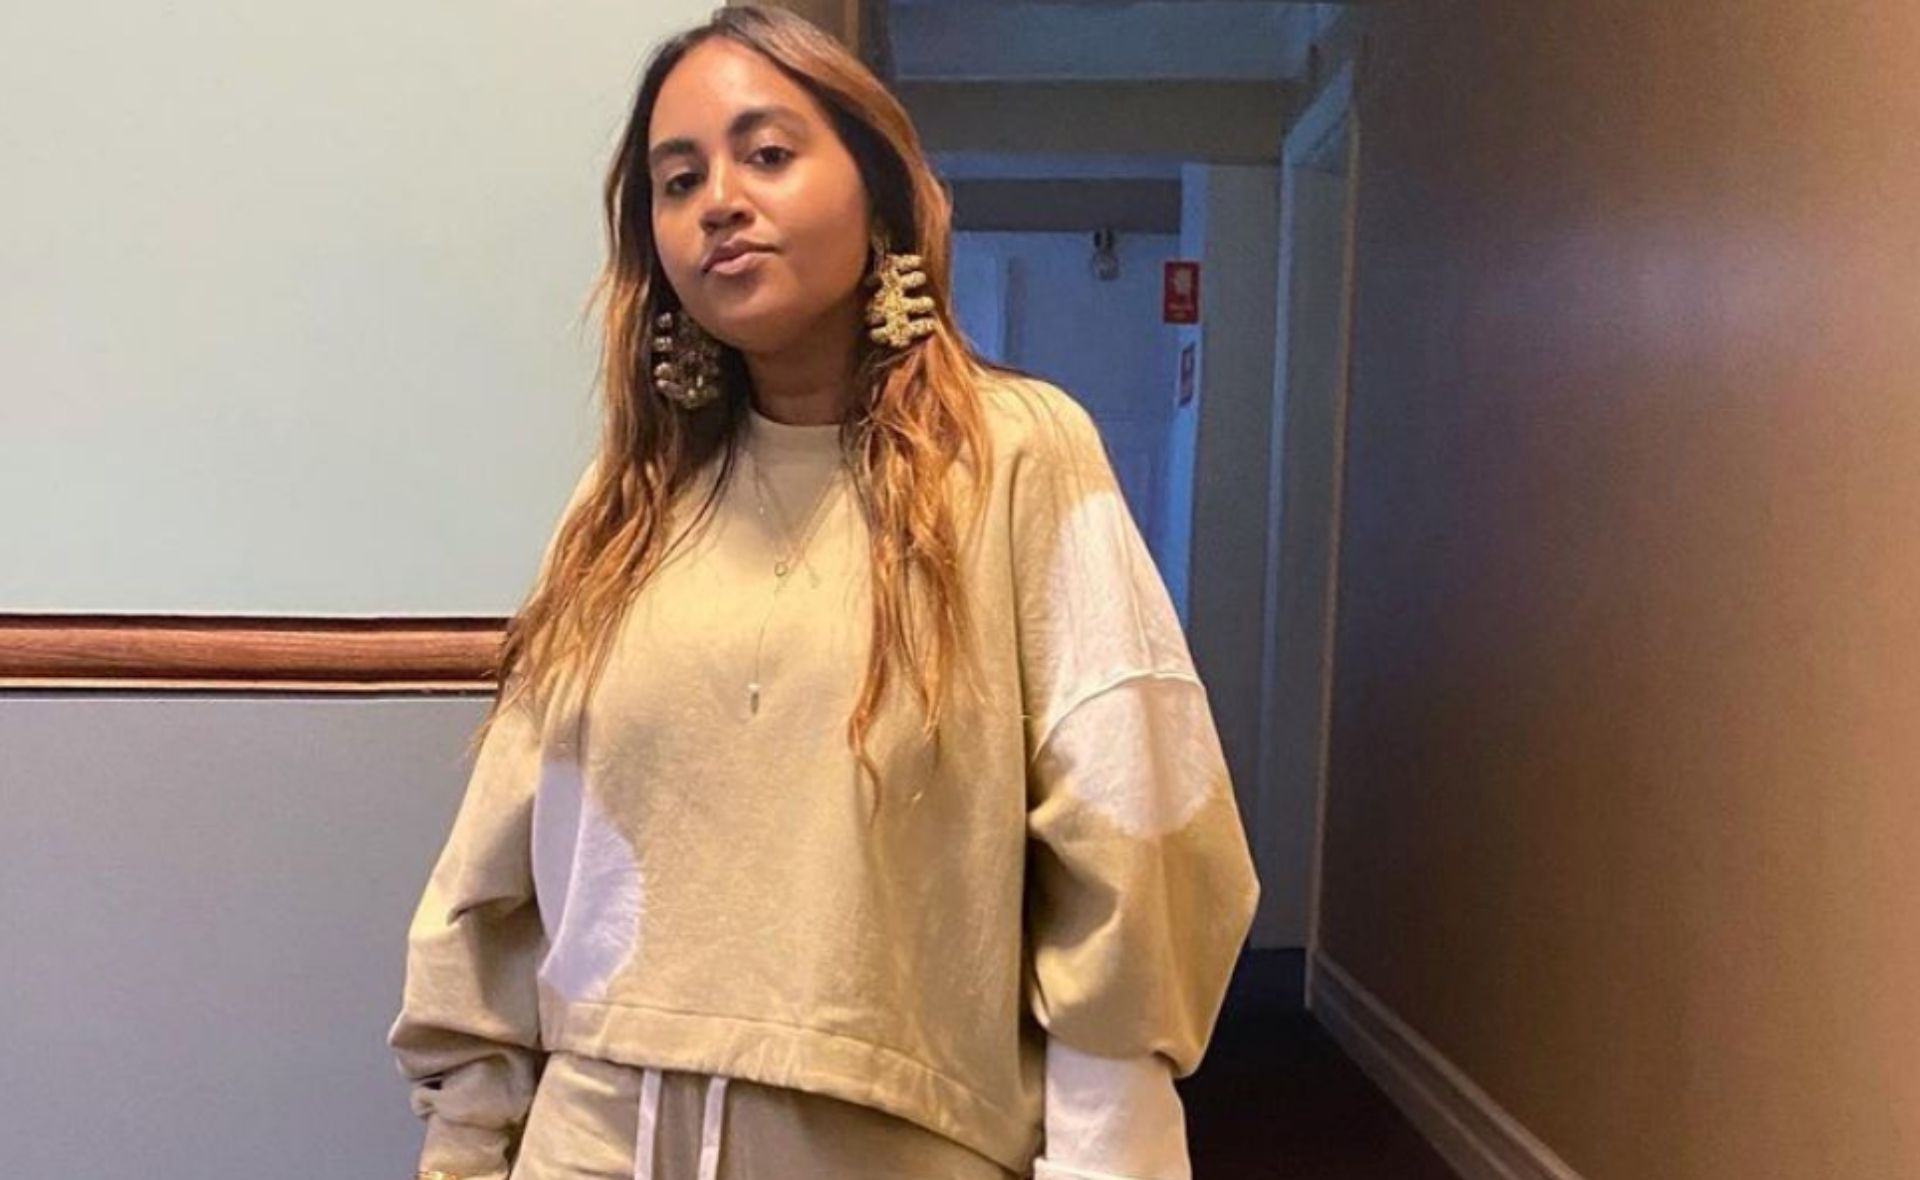 To ring in her 32nd birthday, Jessica Mauboy shares the most adorable 90s childhood moment